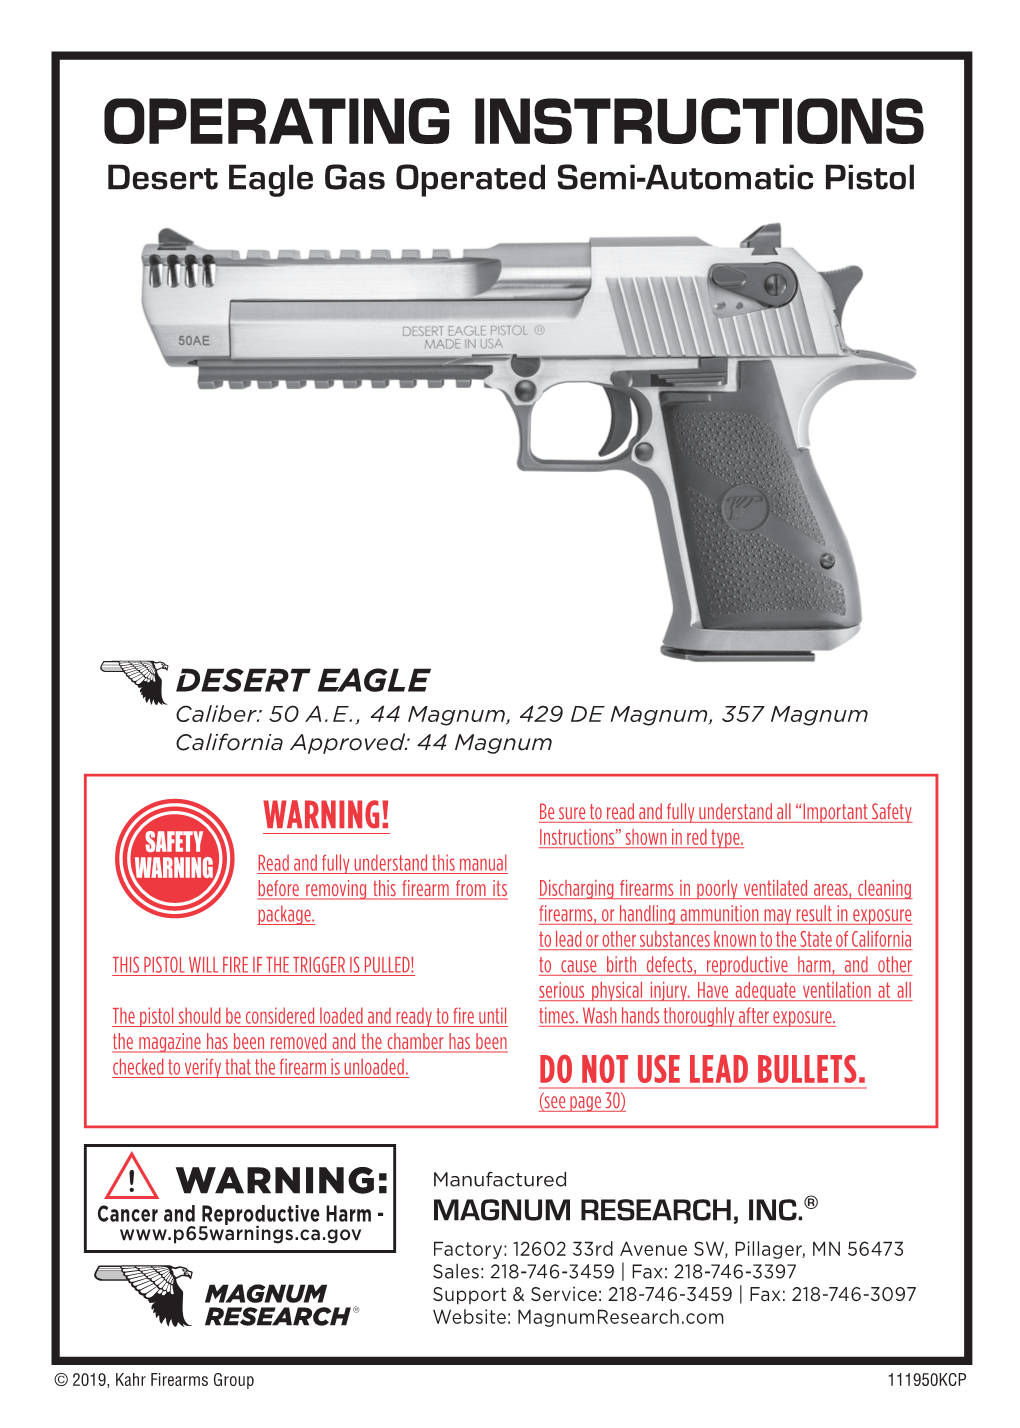 OPERATING INSTRUCTIONS Desert Eagle Gas Operated Semi-Automatic Pistol